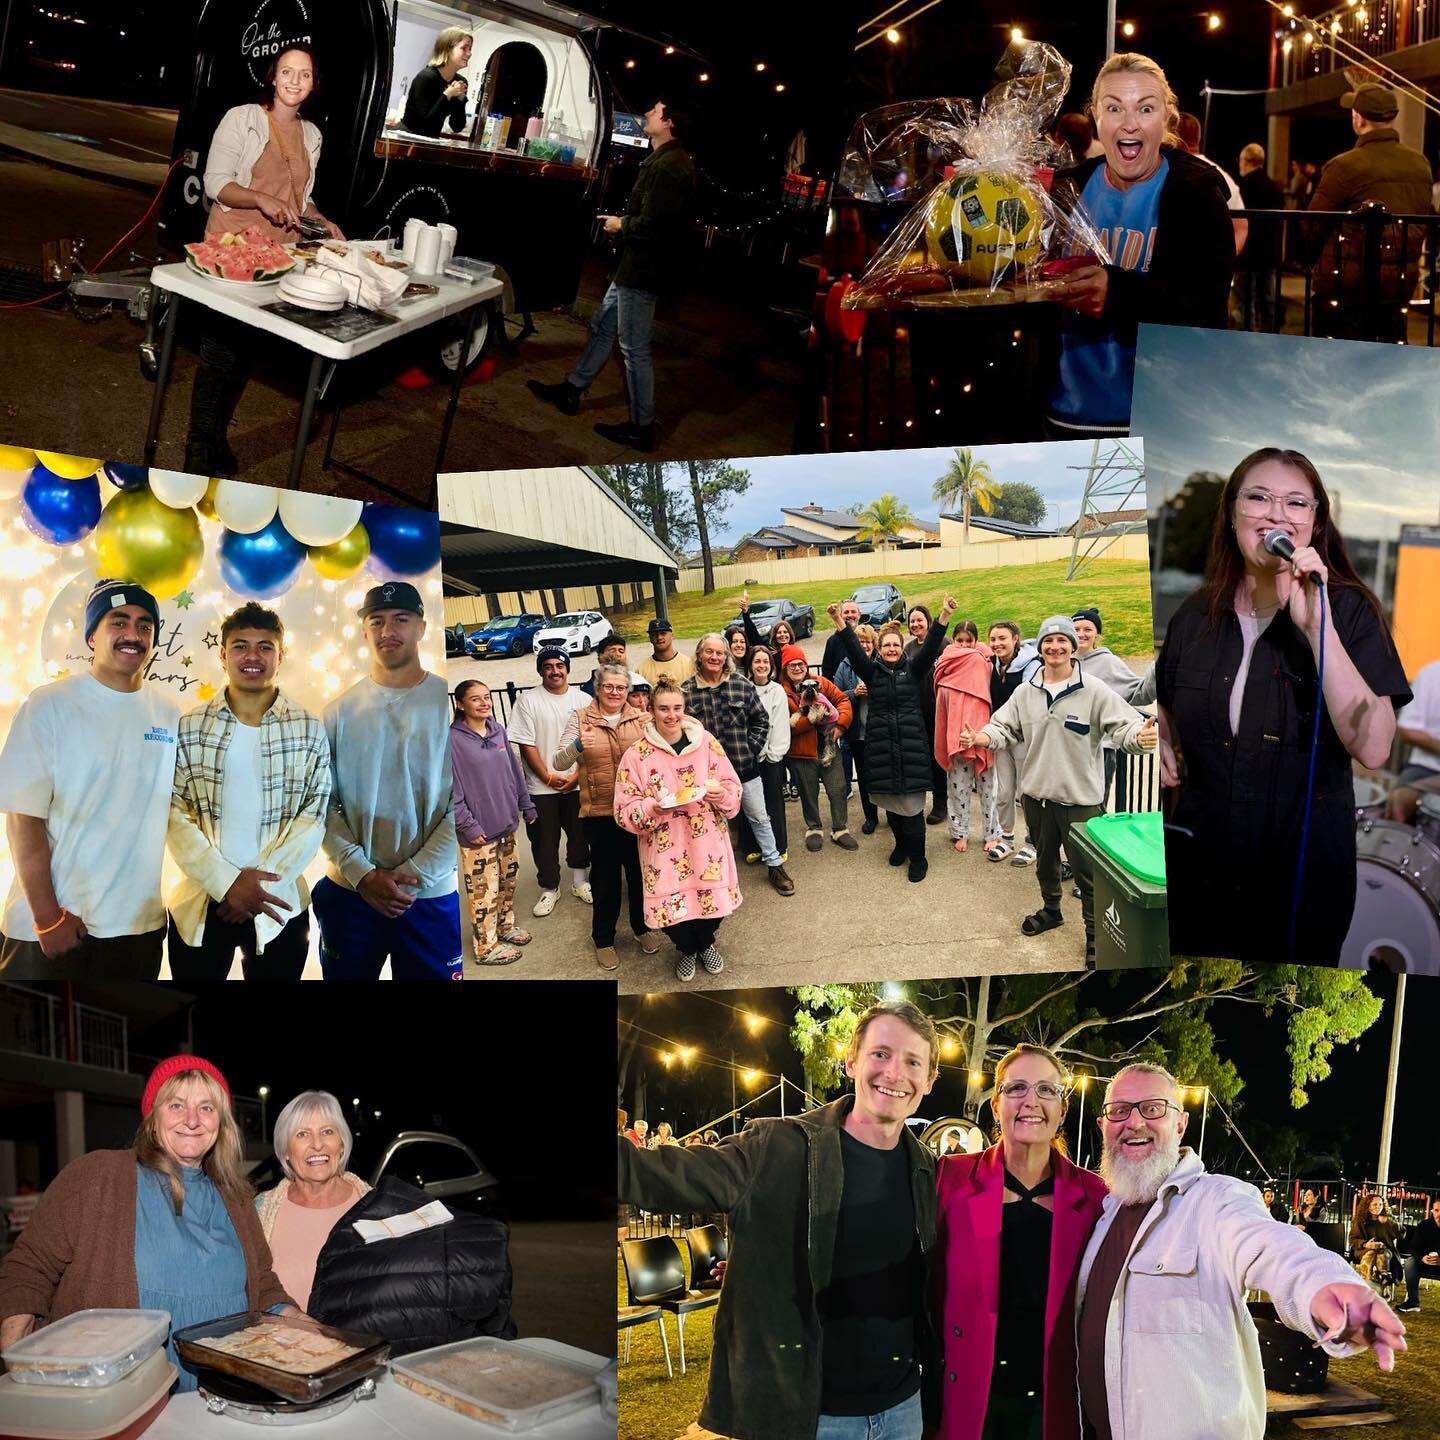 Thank you ❤️to all who supported our fundraiser #nightunderthestars2023🌠on Saturday night. We were able to raise much needed funds for the #car2homeproject and for those experiencing homelessness in the Lake Macquarie region. #homelessnessweek2023 w